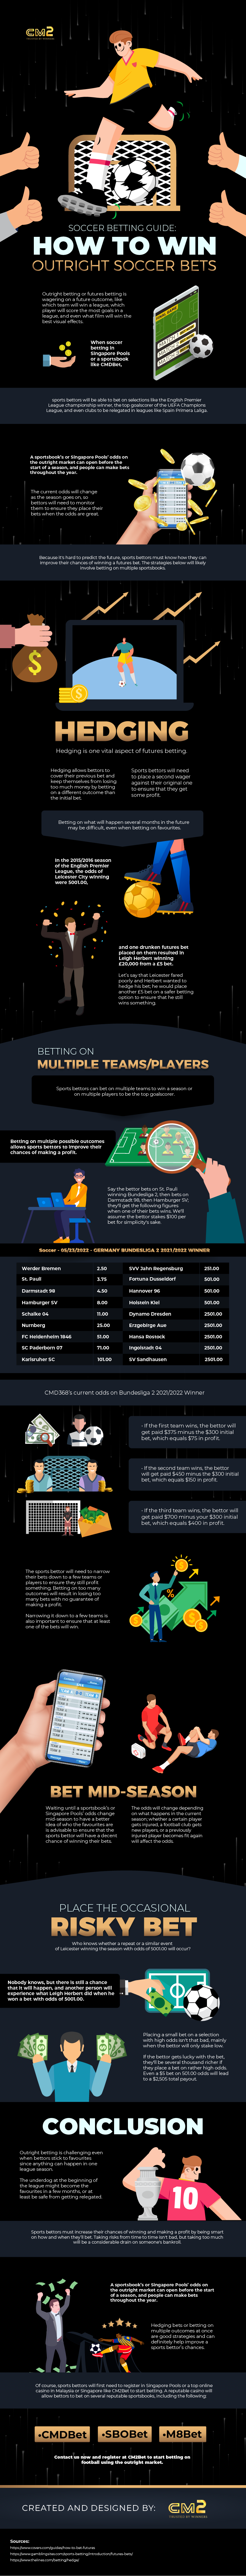 Soccer Betting Guide: How to Win Outright Soccer Bets—Infographic